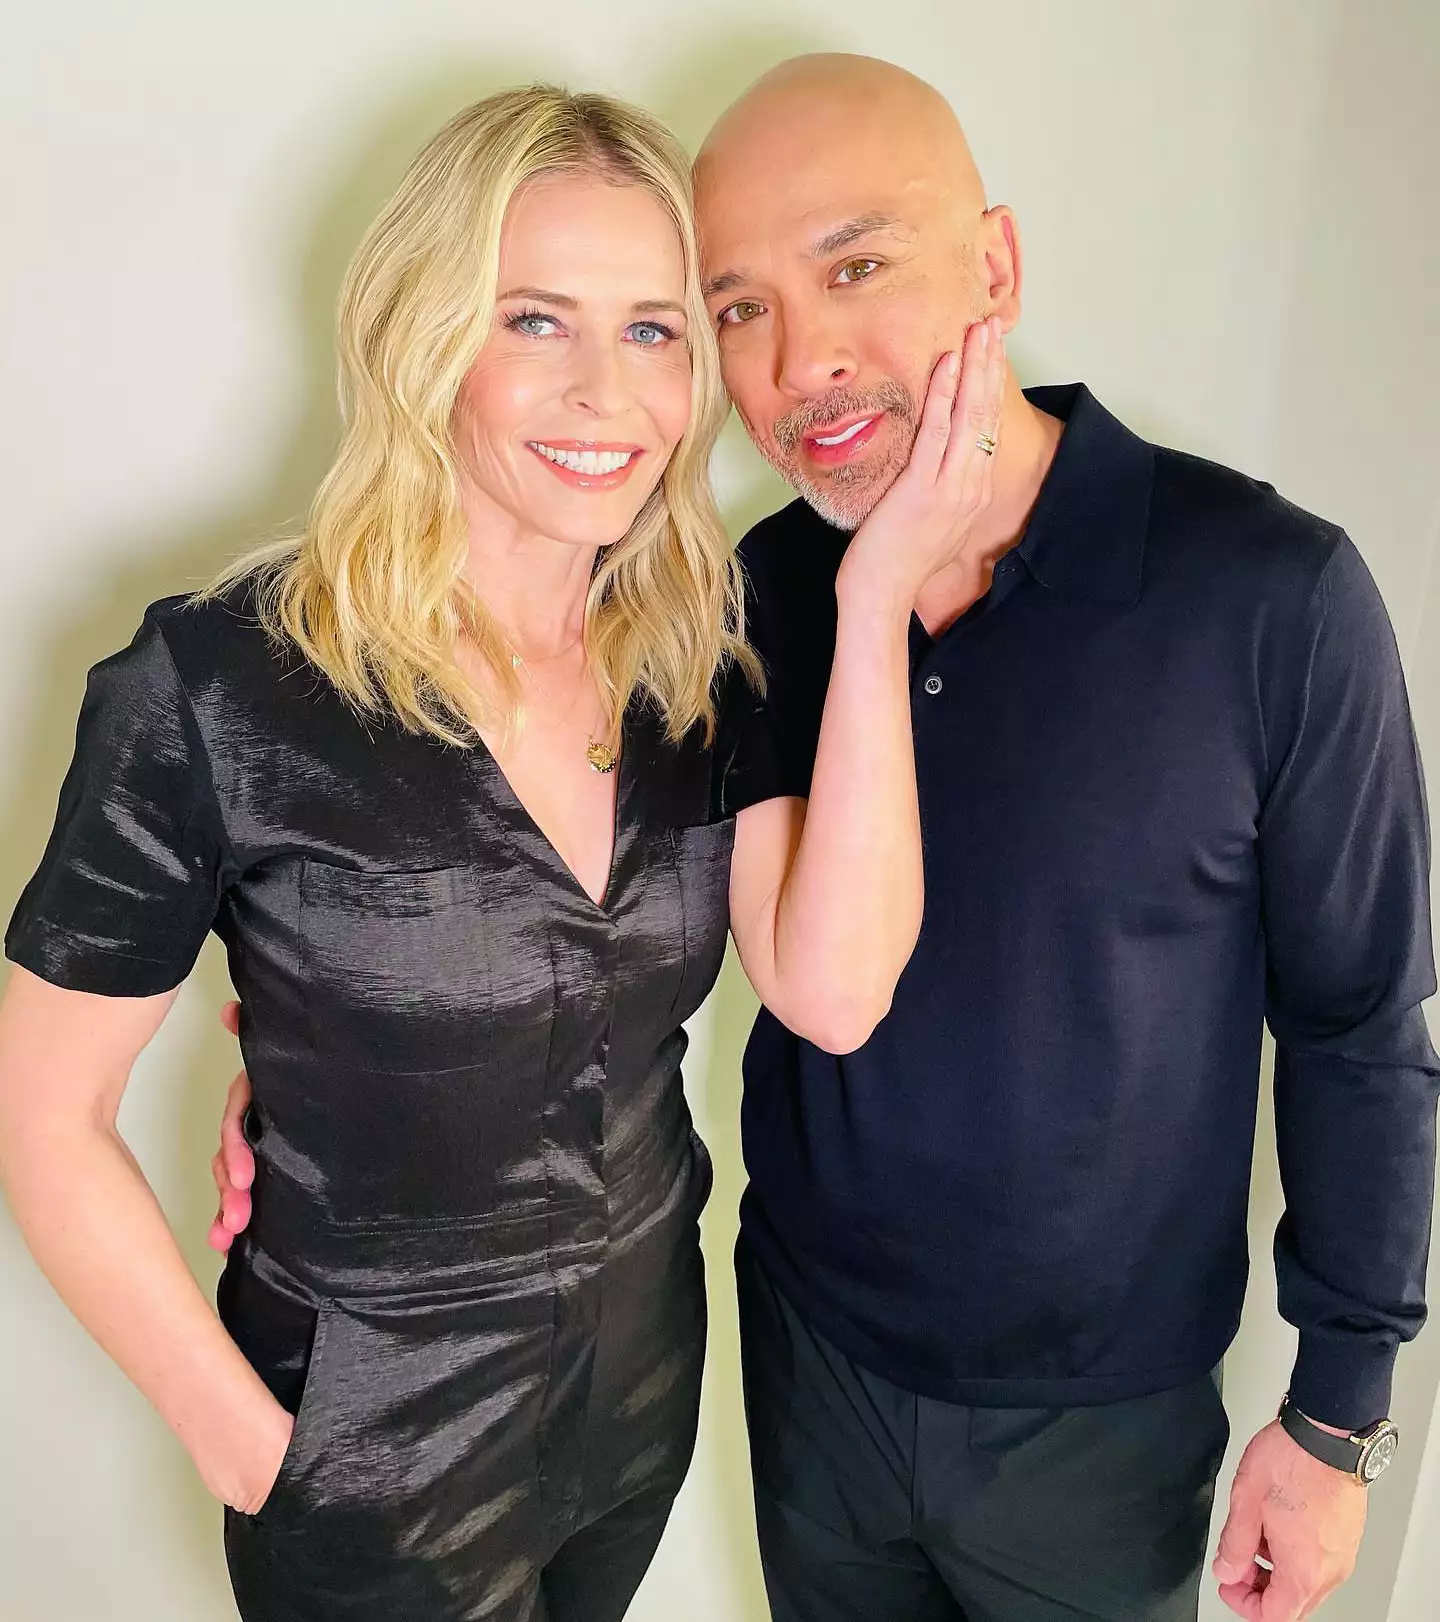 Are Jo Koy and Chelsea Handler together